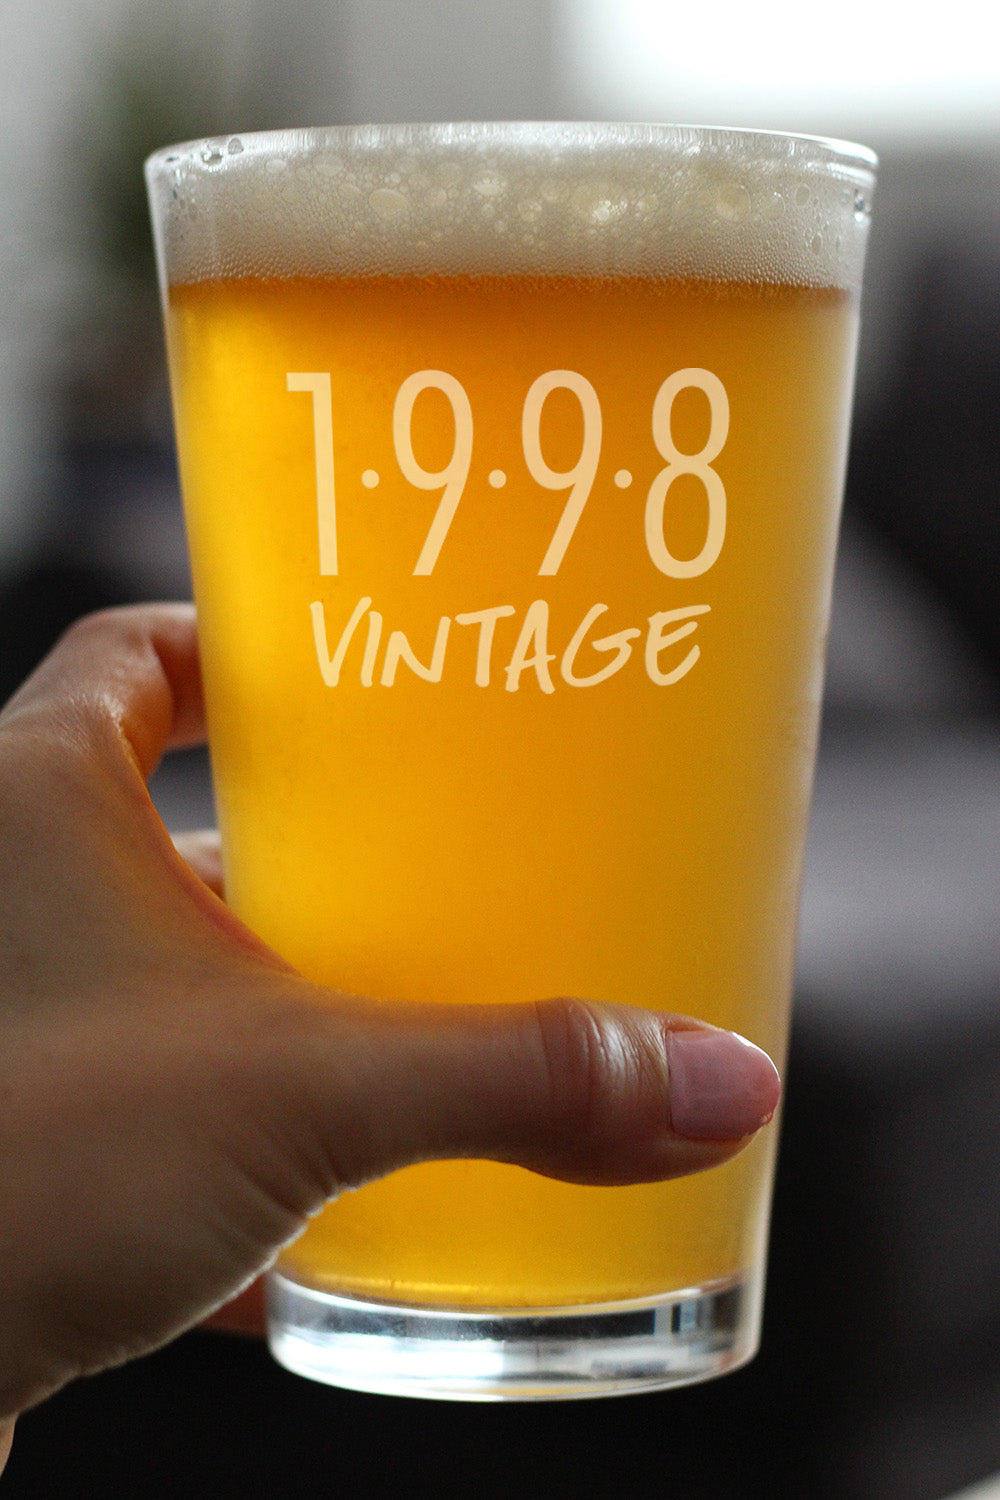 Vintage 1998 - Pint Glass for Beer - 26th Birthday Gifts for Men or Women Turning 26 - Fun Bday Party Decor - 16 oz